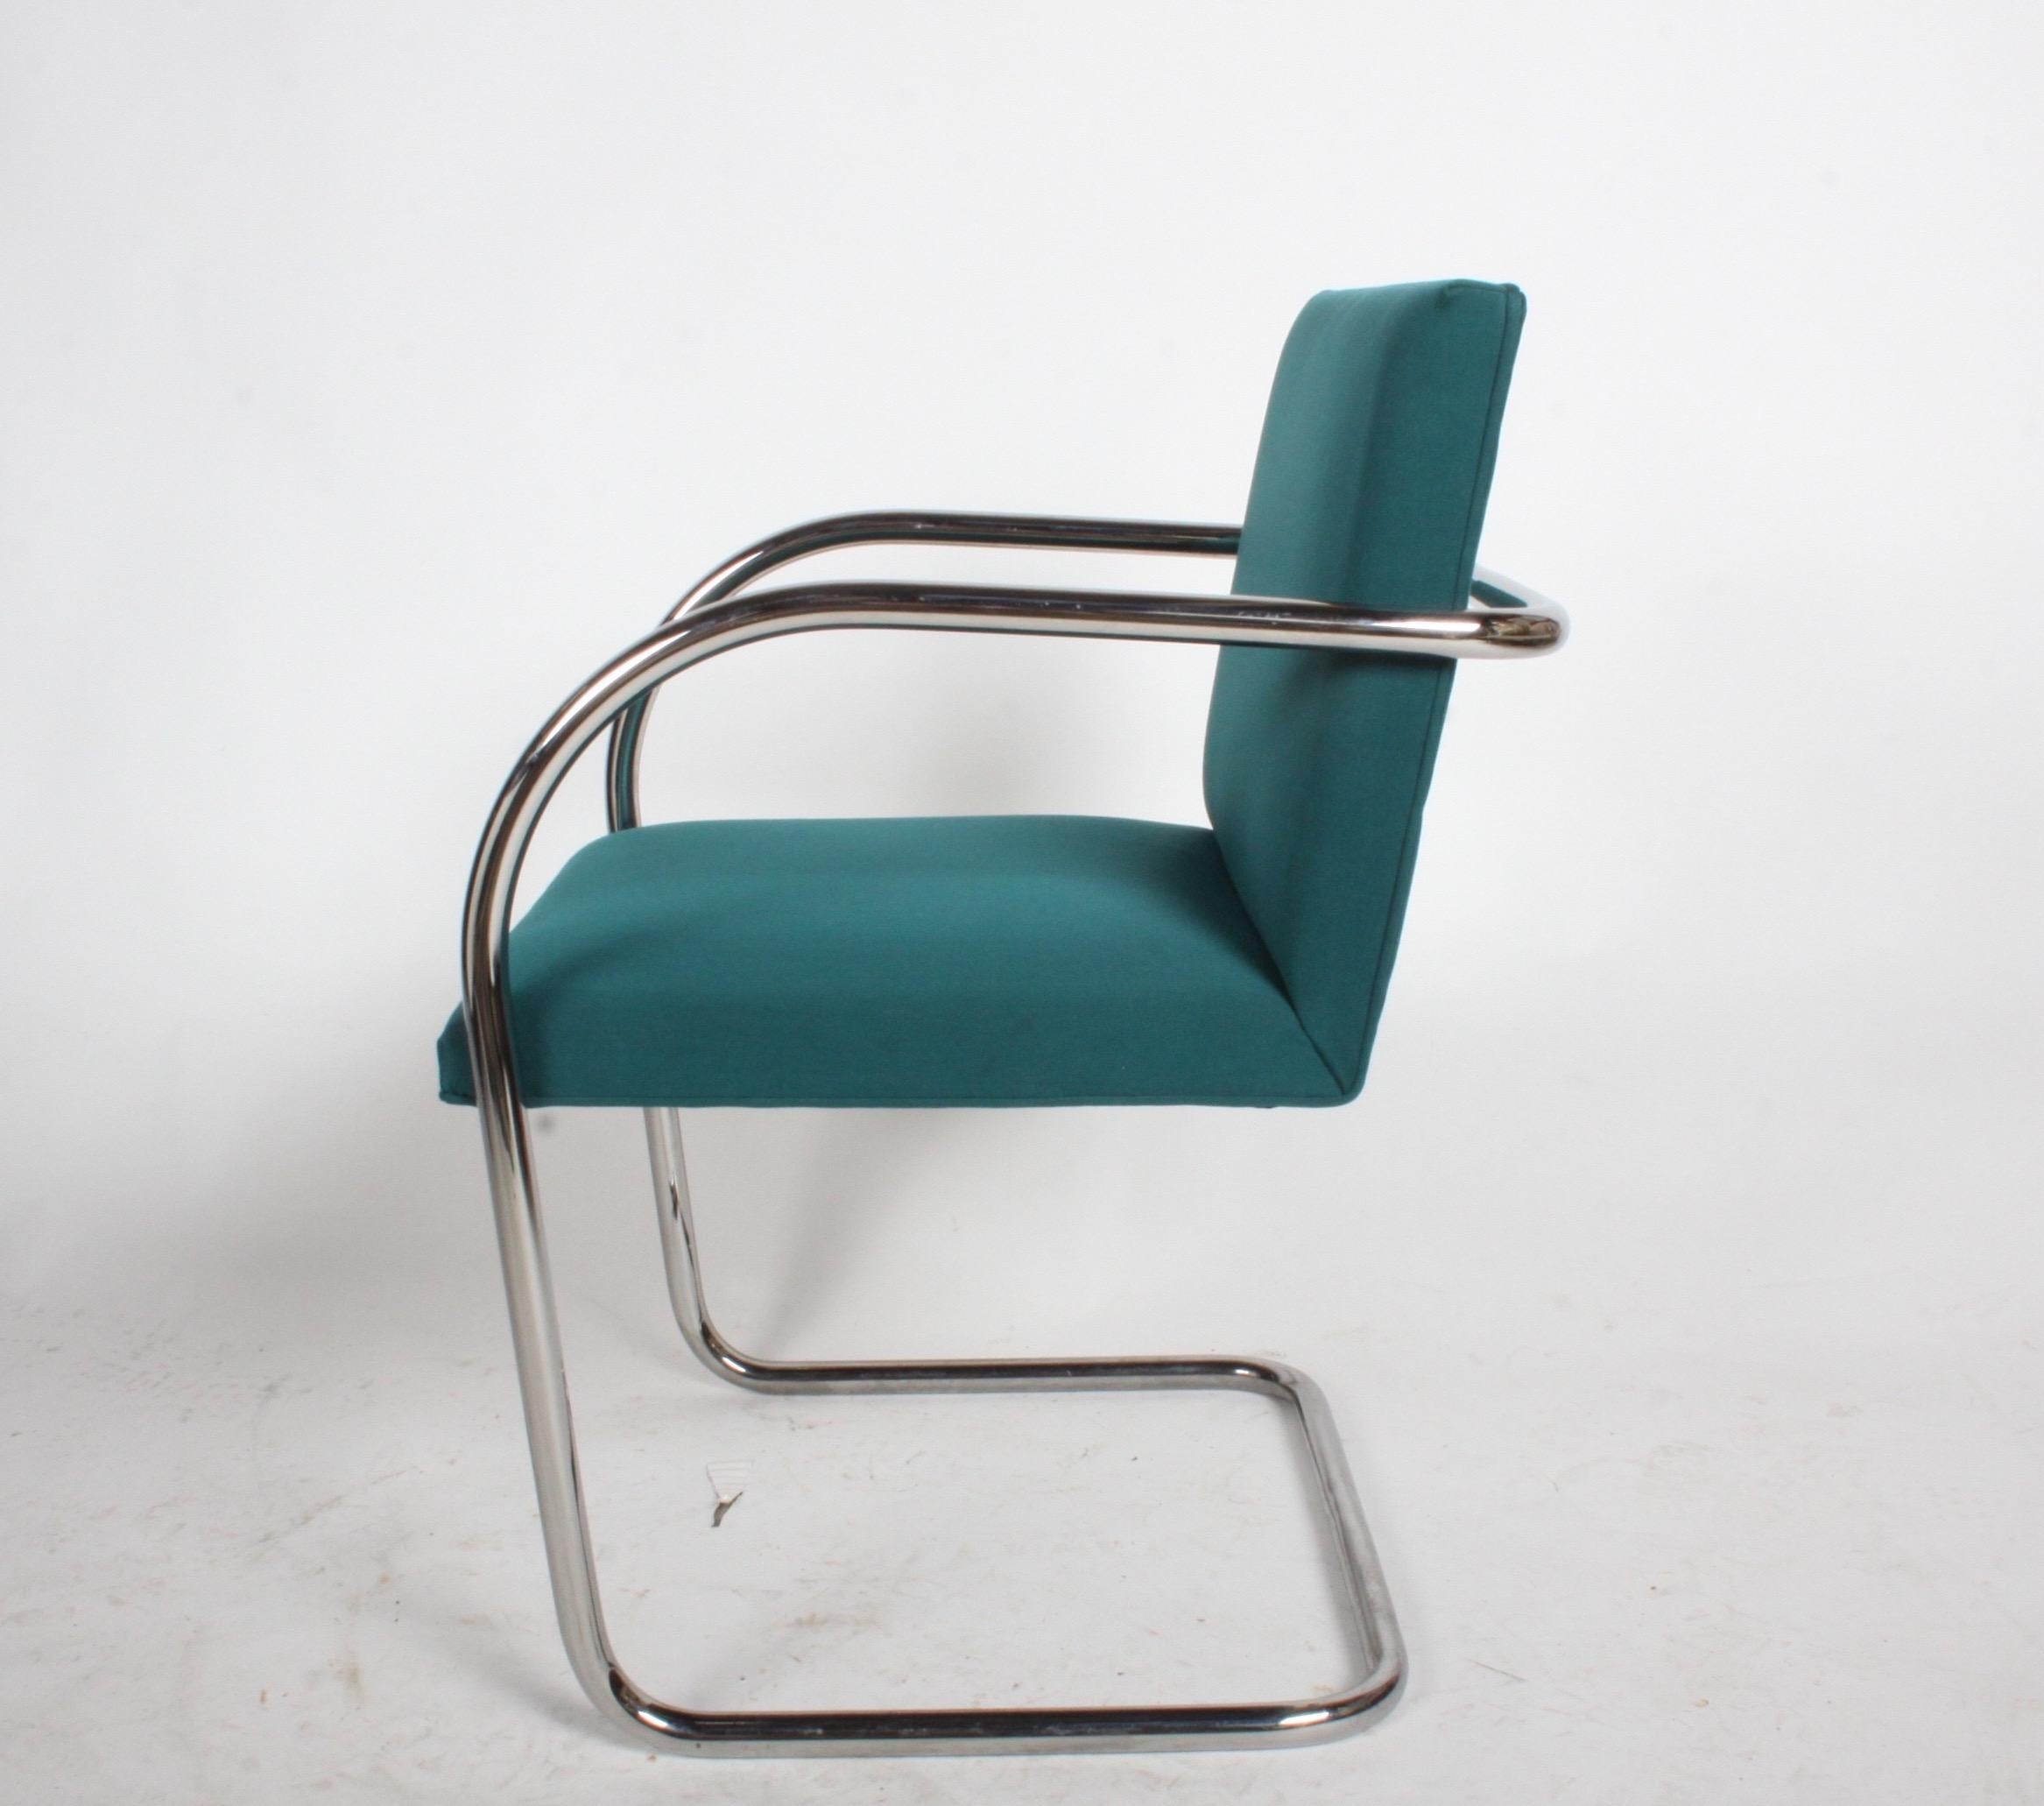 American Mid-Century Modern Ludwig Mies van der Rohe for Knoll Tubular Brno Chairs x 2 For Sale